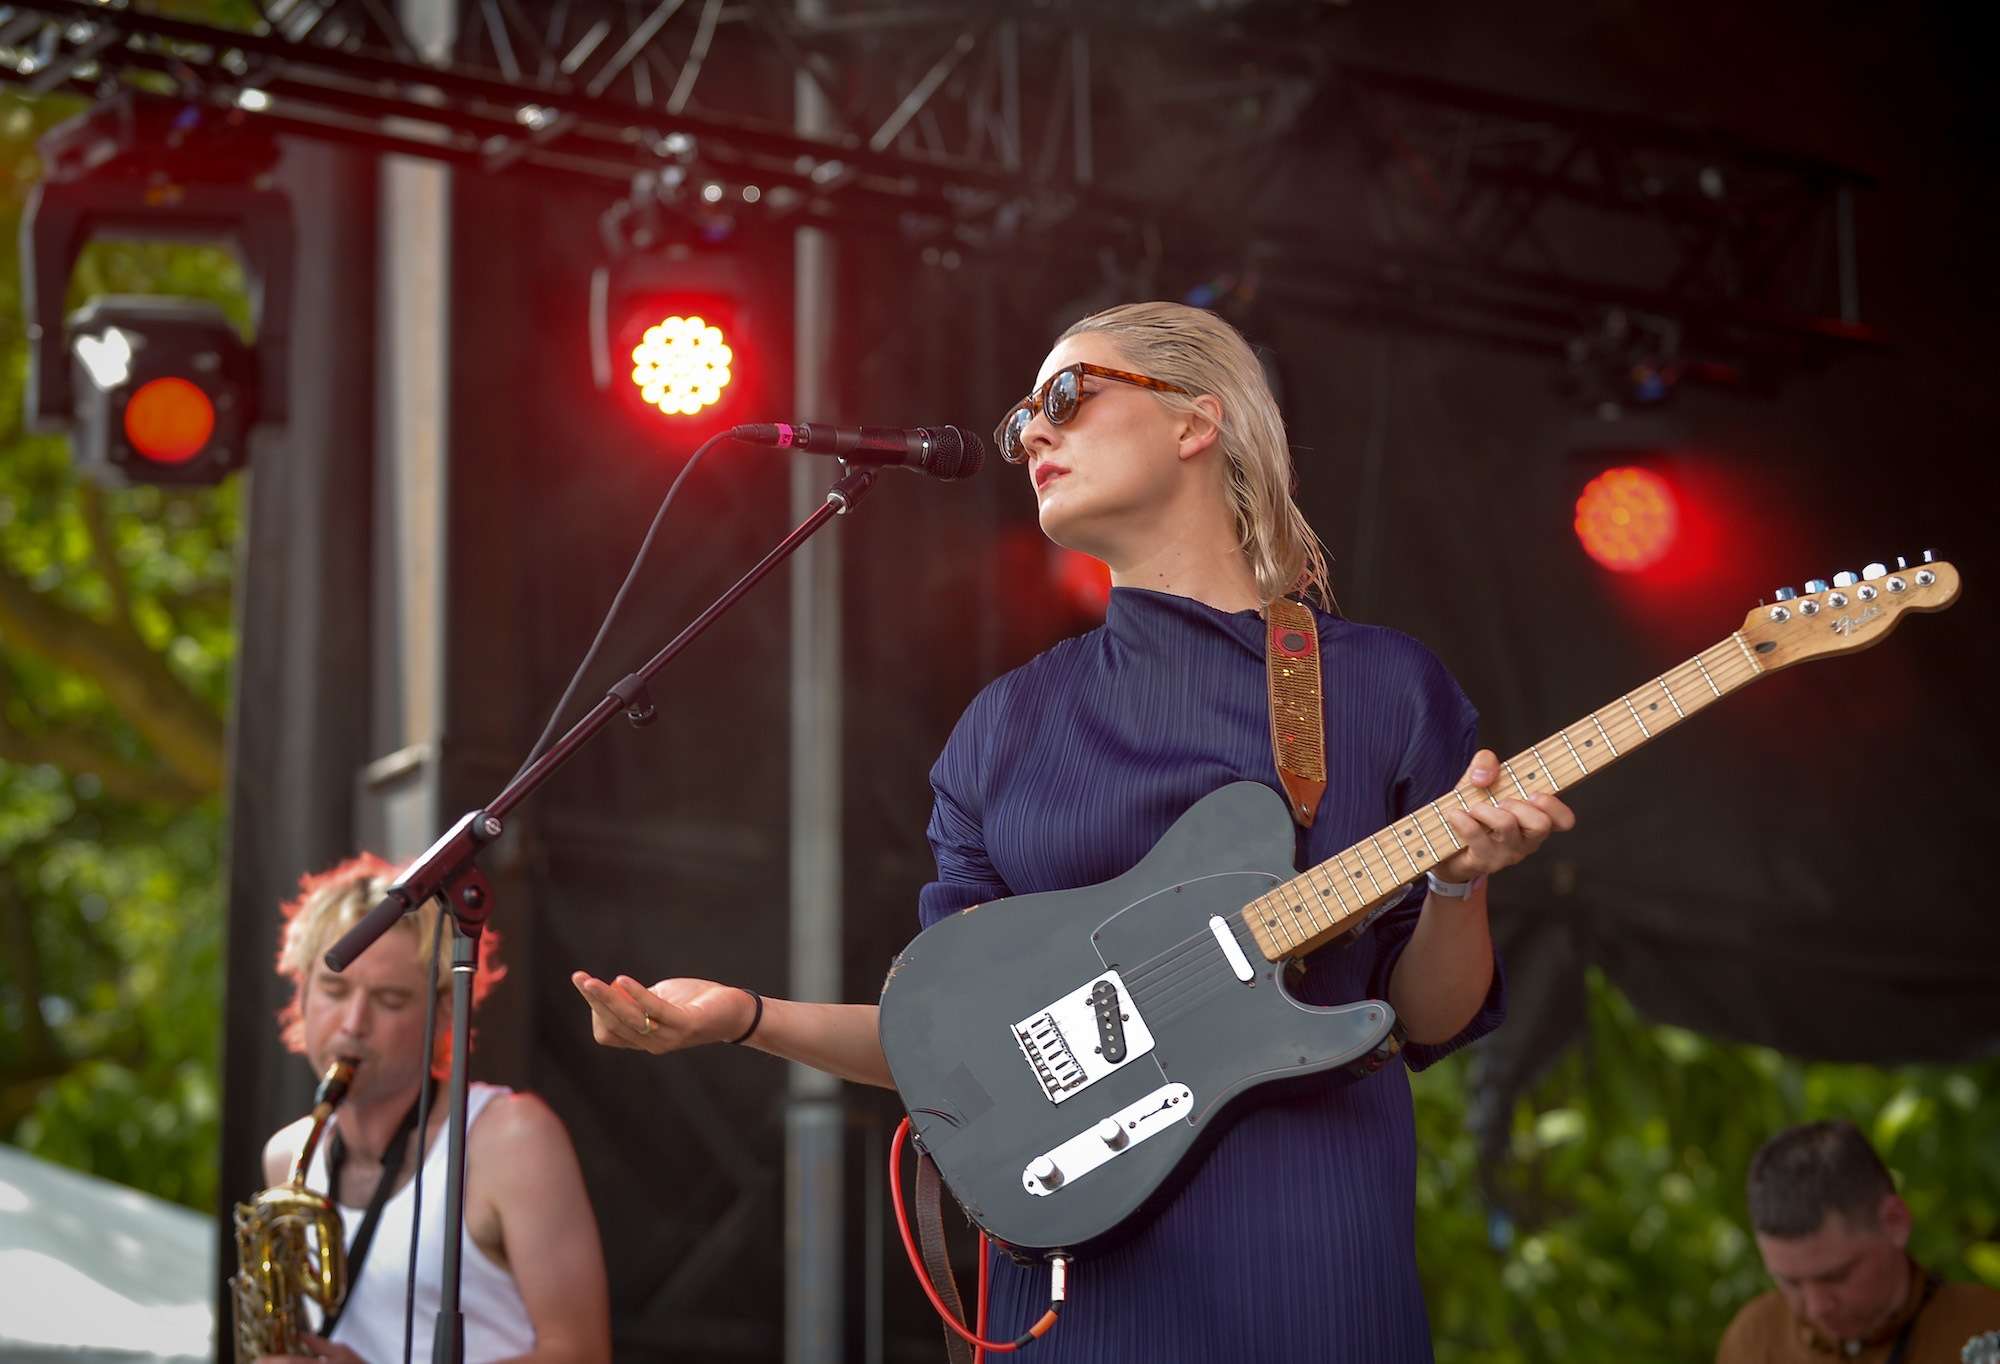 Cate Le Bon Live at Pitchfork [GALLERY] 10